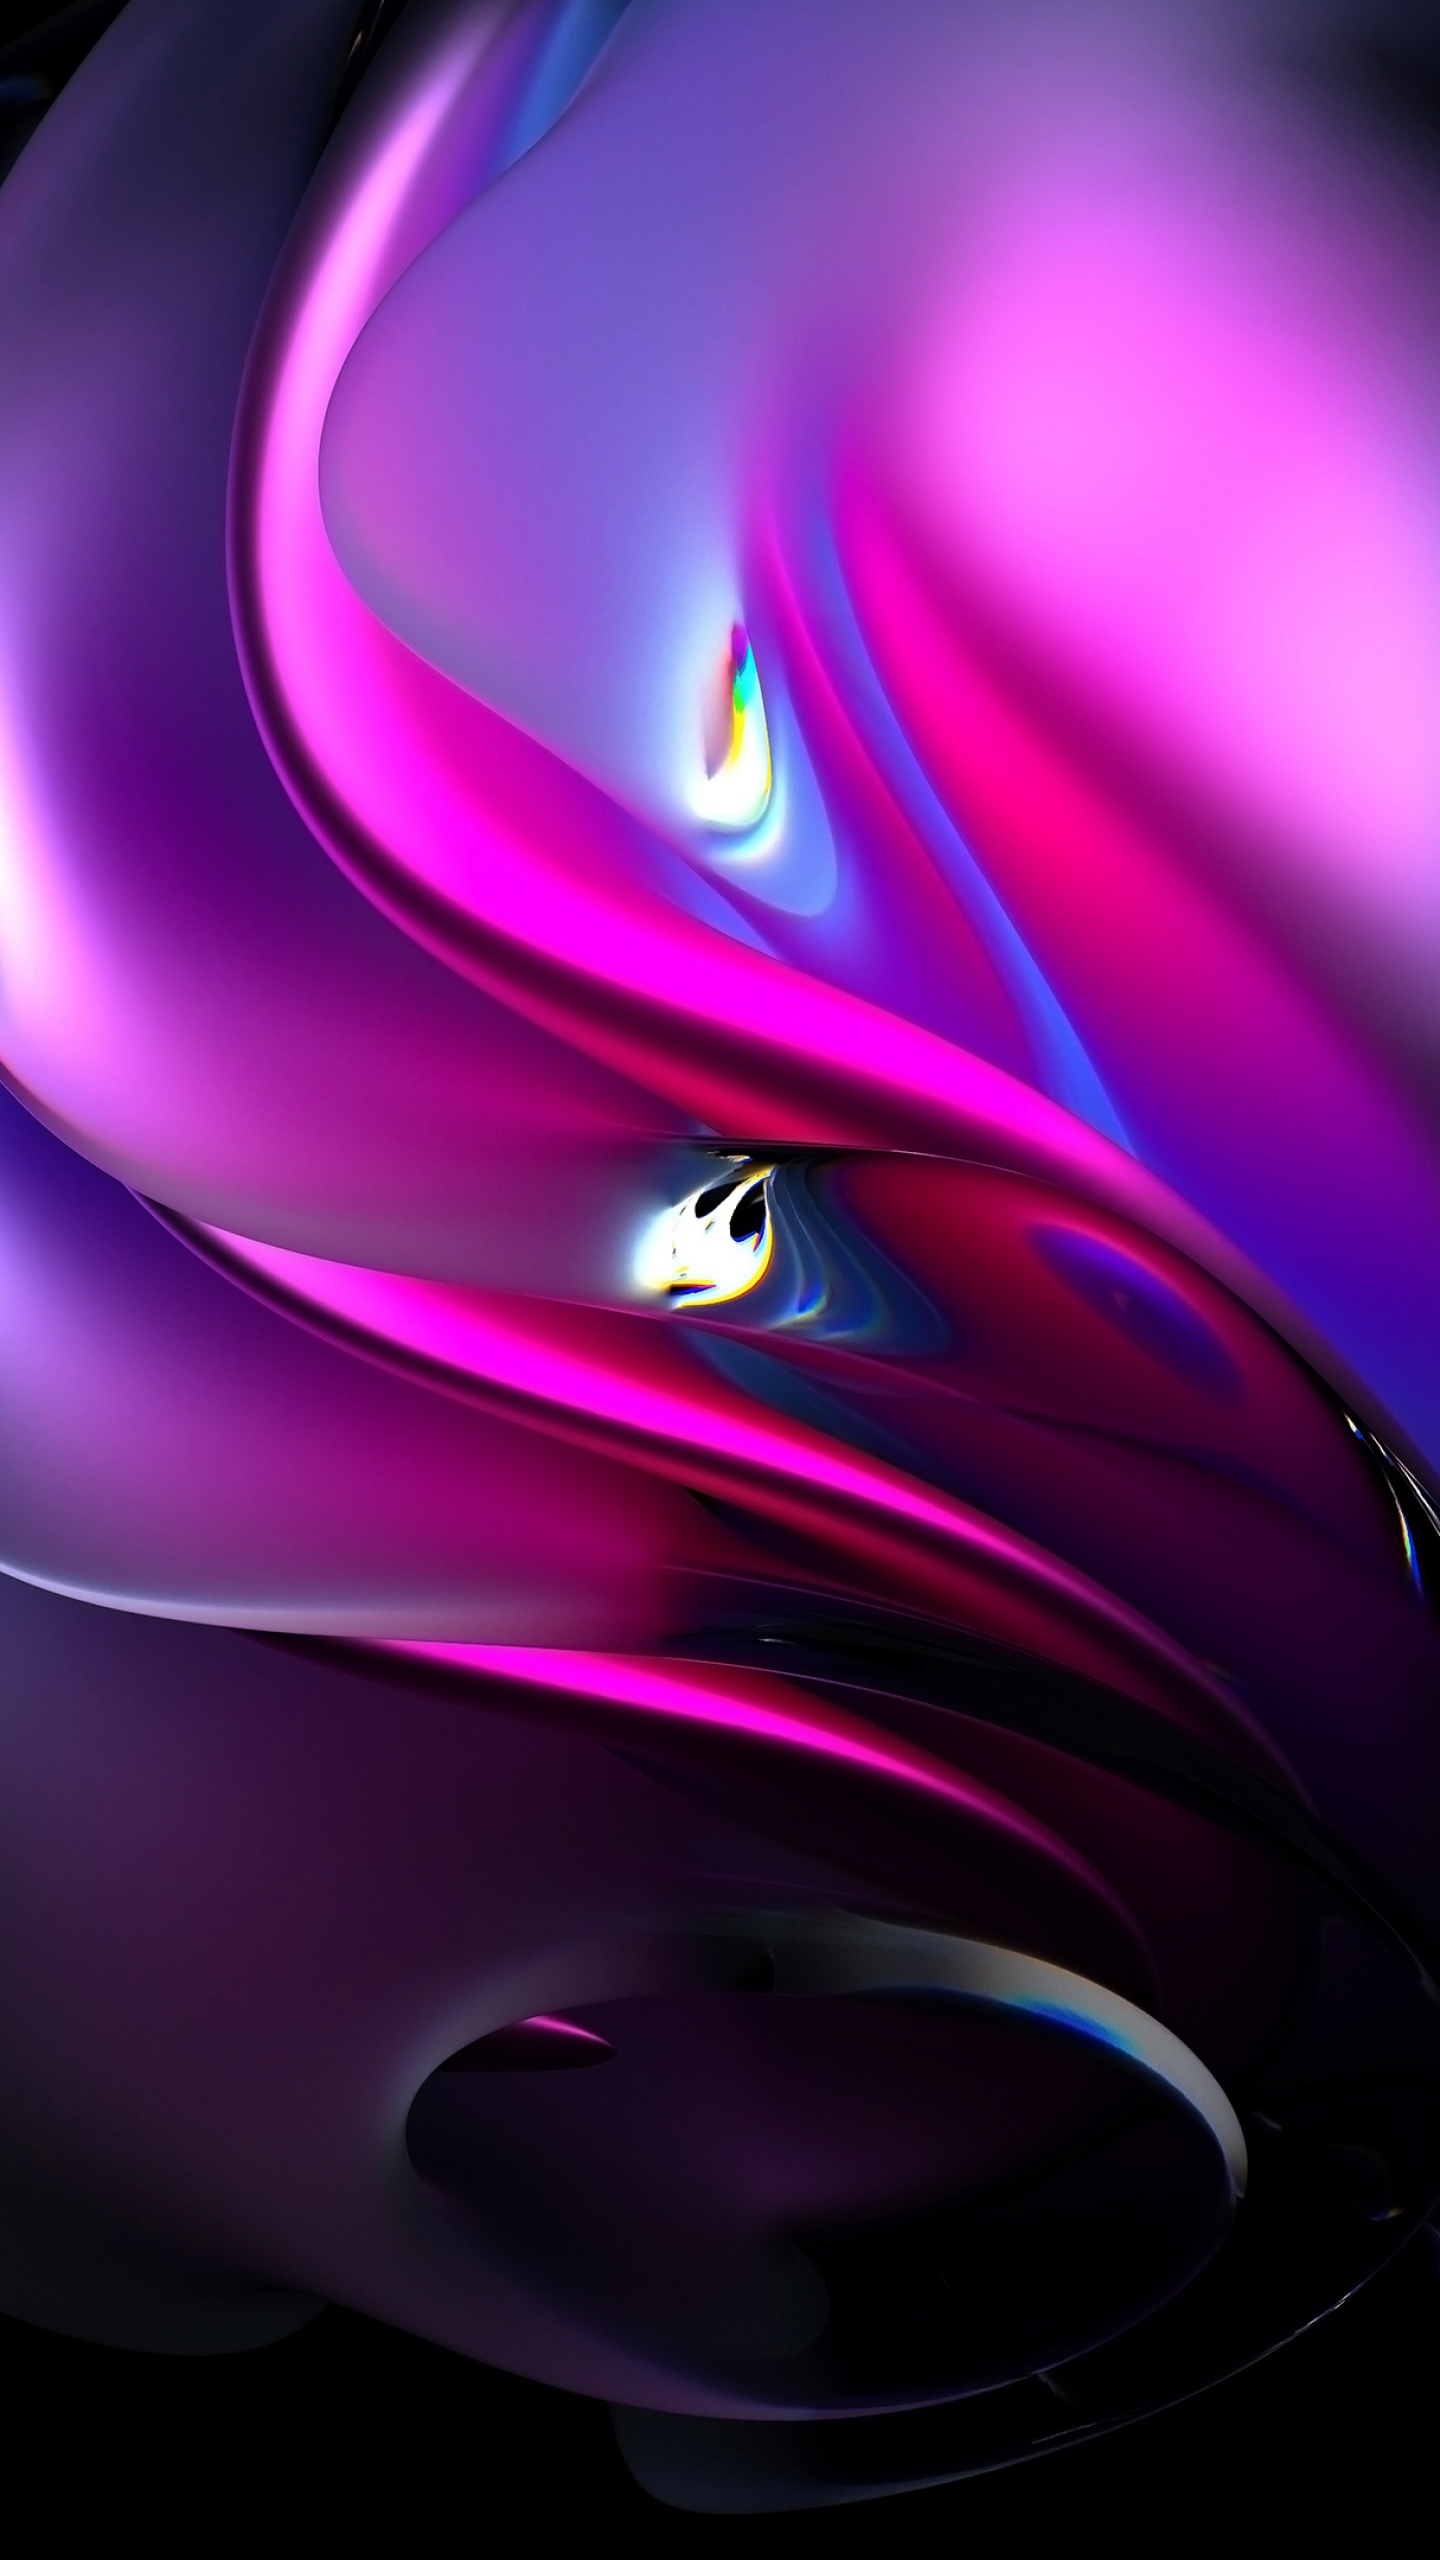 Abstract background Wallpaper 4K, Black background, Abstract, #8657